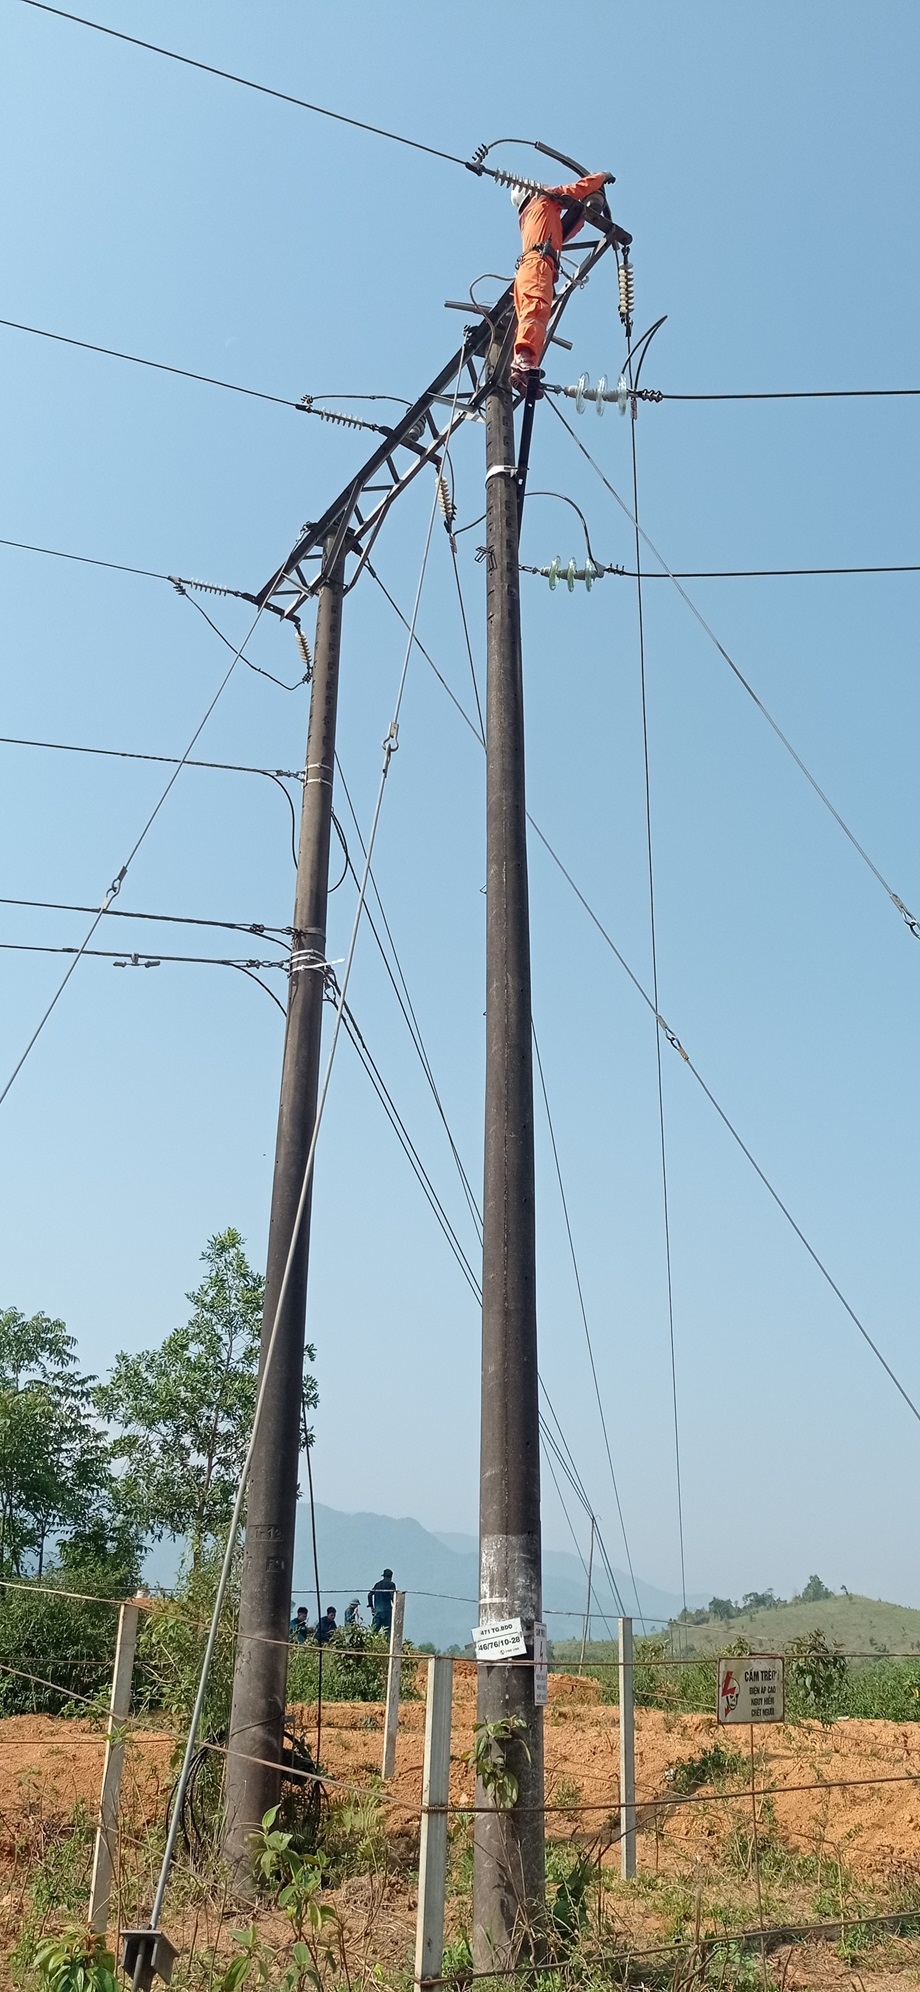 A power lines on a pole

Description automatically generated